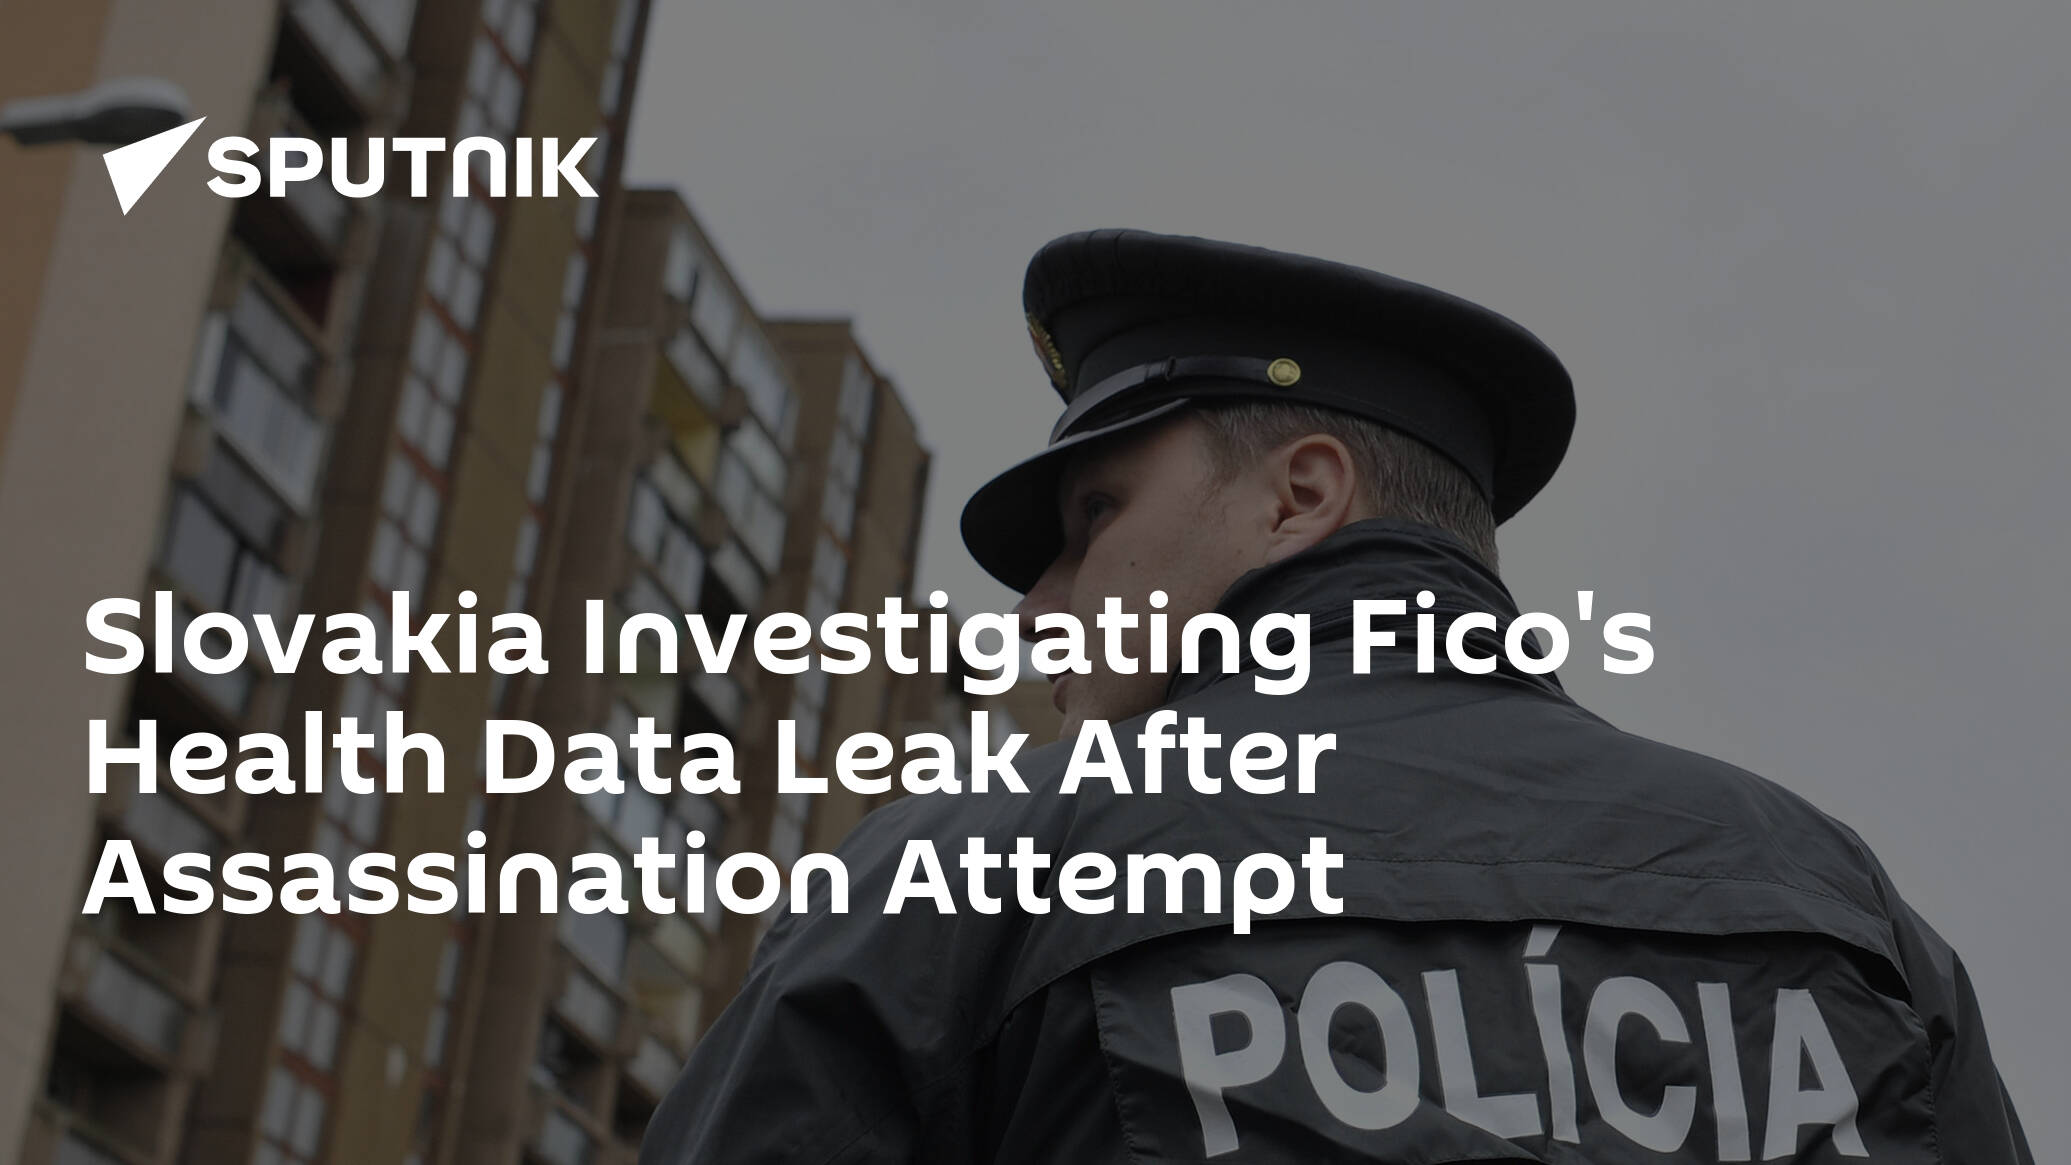 Slovakia Investigating Fico's Health Data Leak After Assassination Attempt